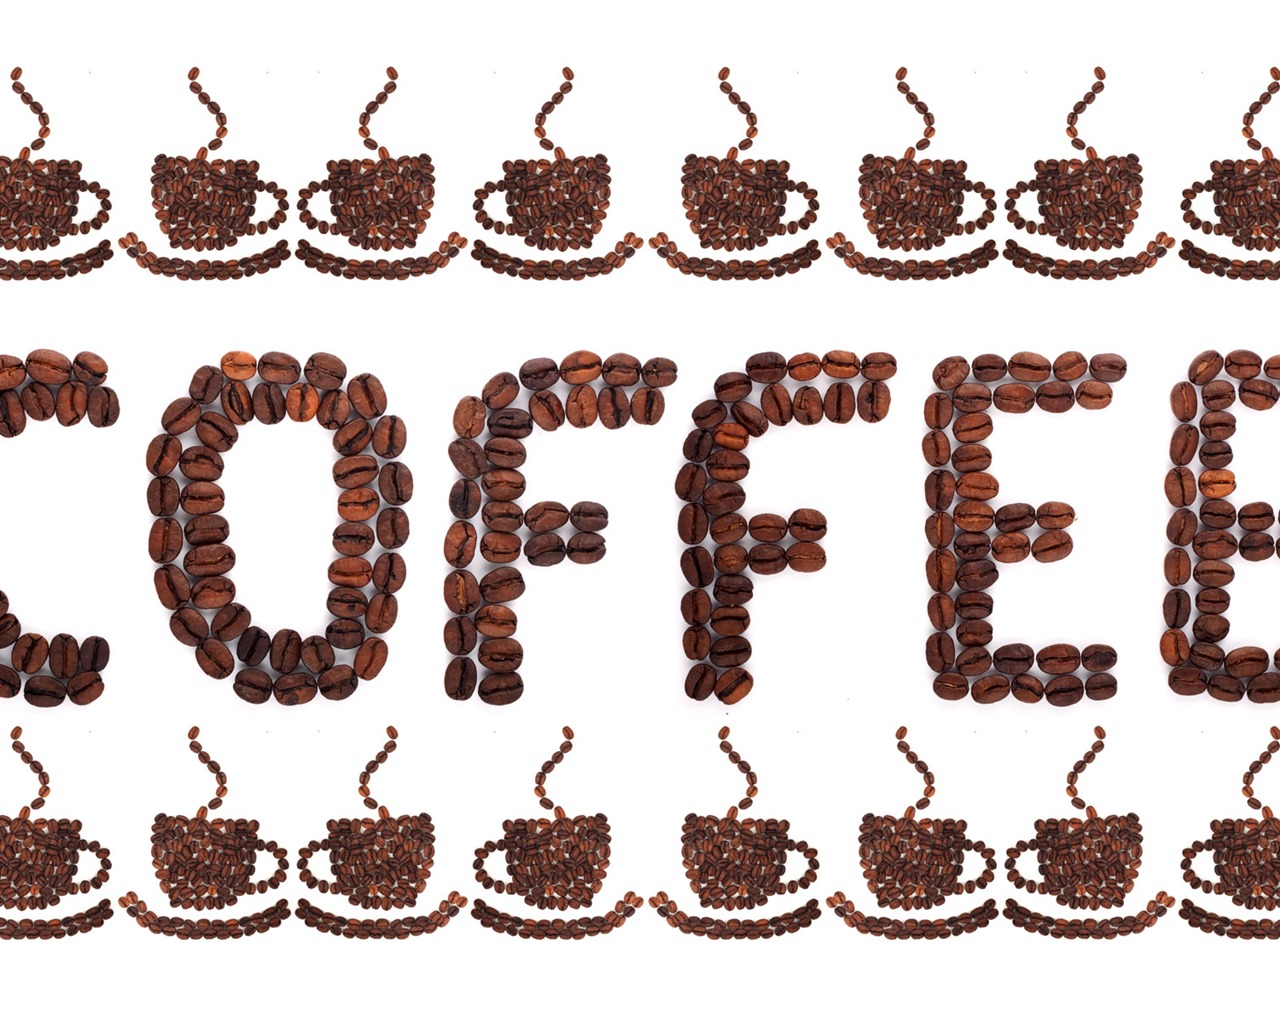 Coffee feature wallpaper (7) #17 - 1280x1024